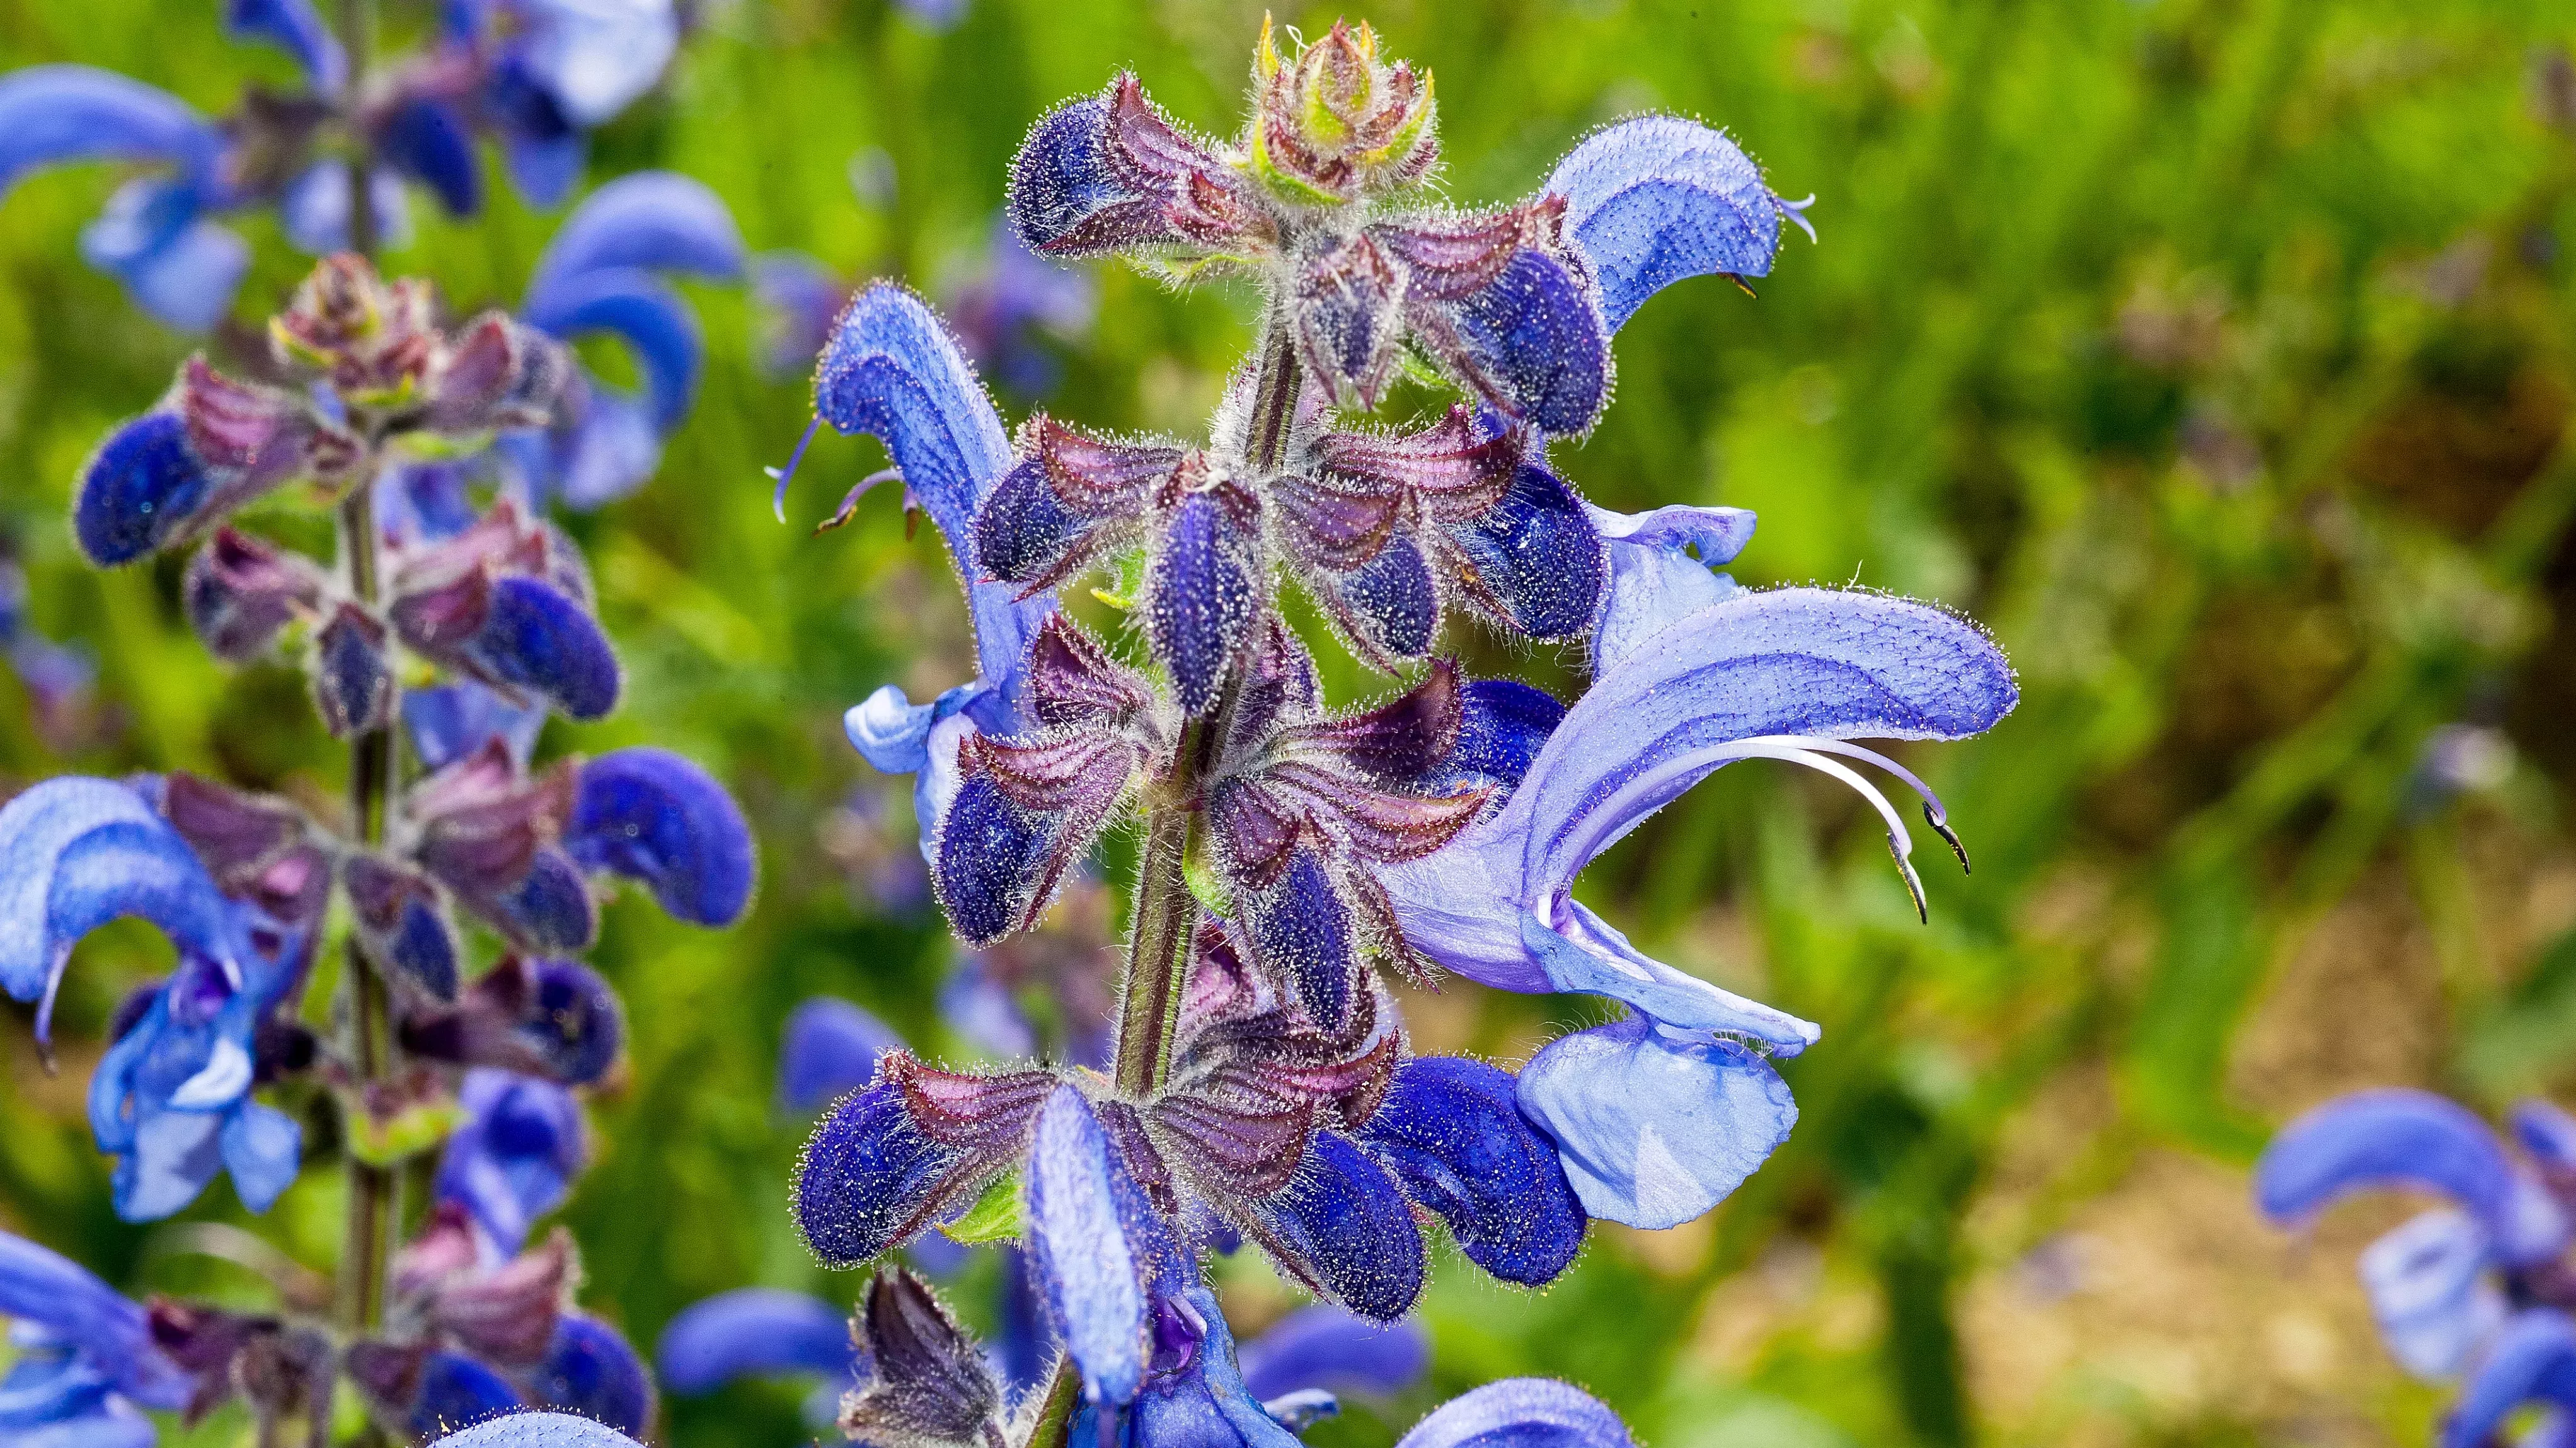 Blue, two-lipped flowers